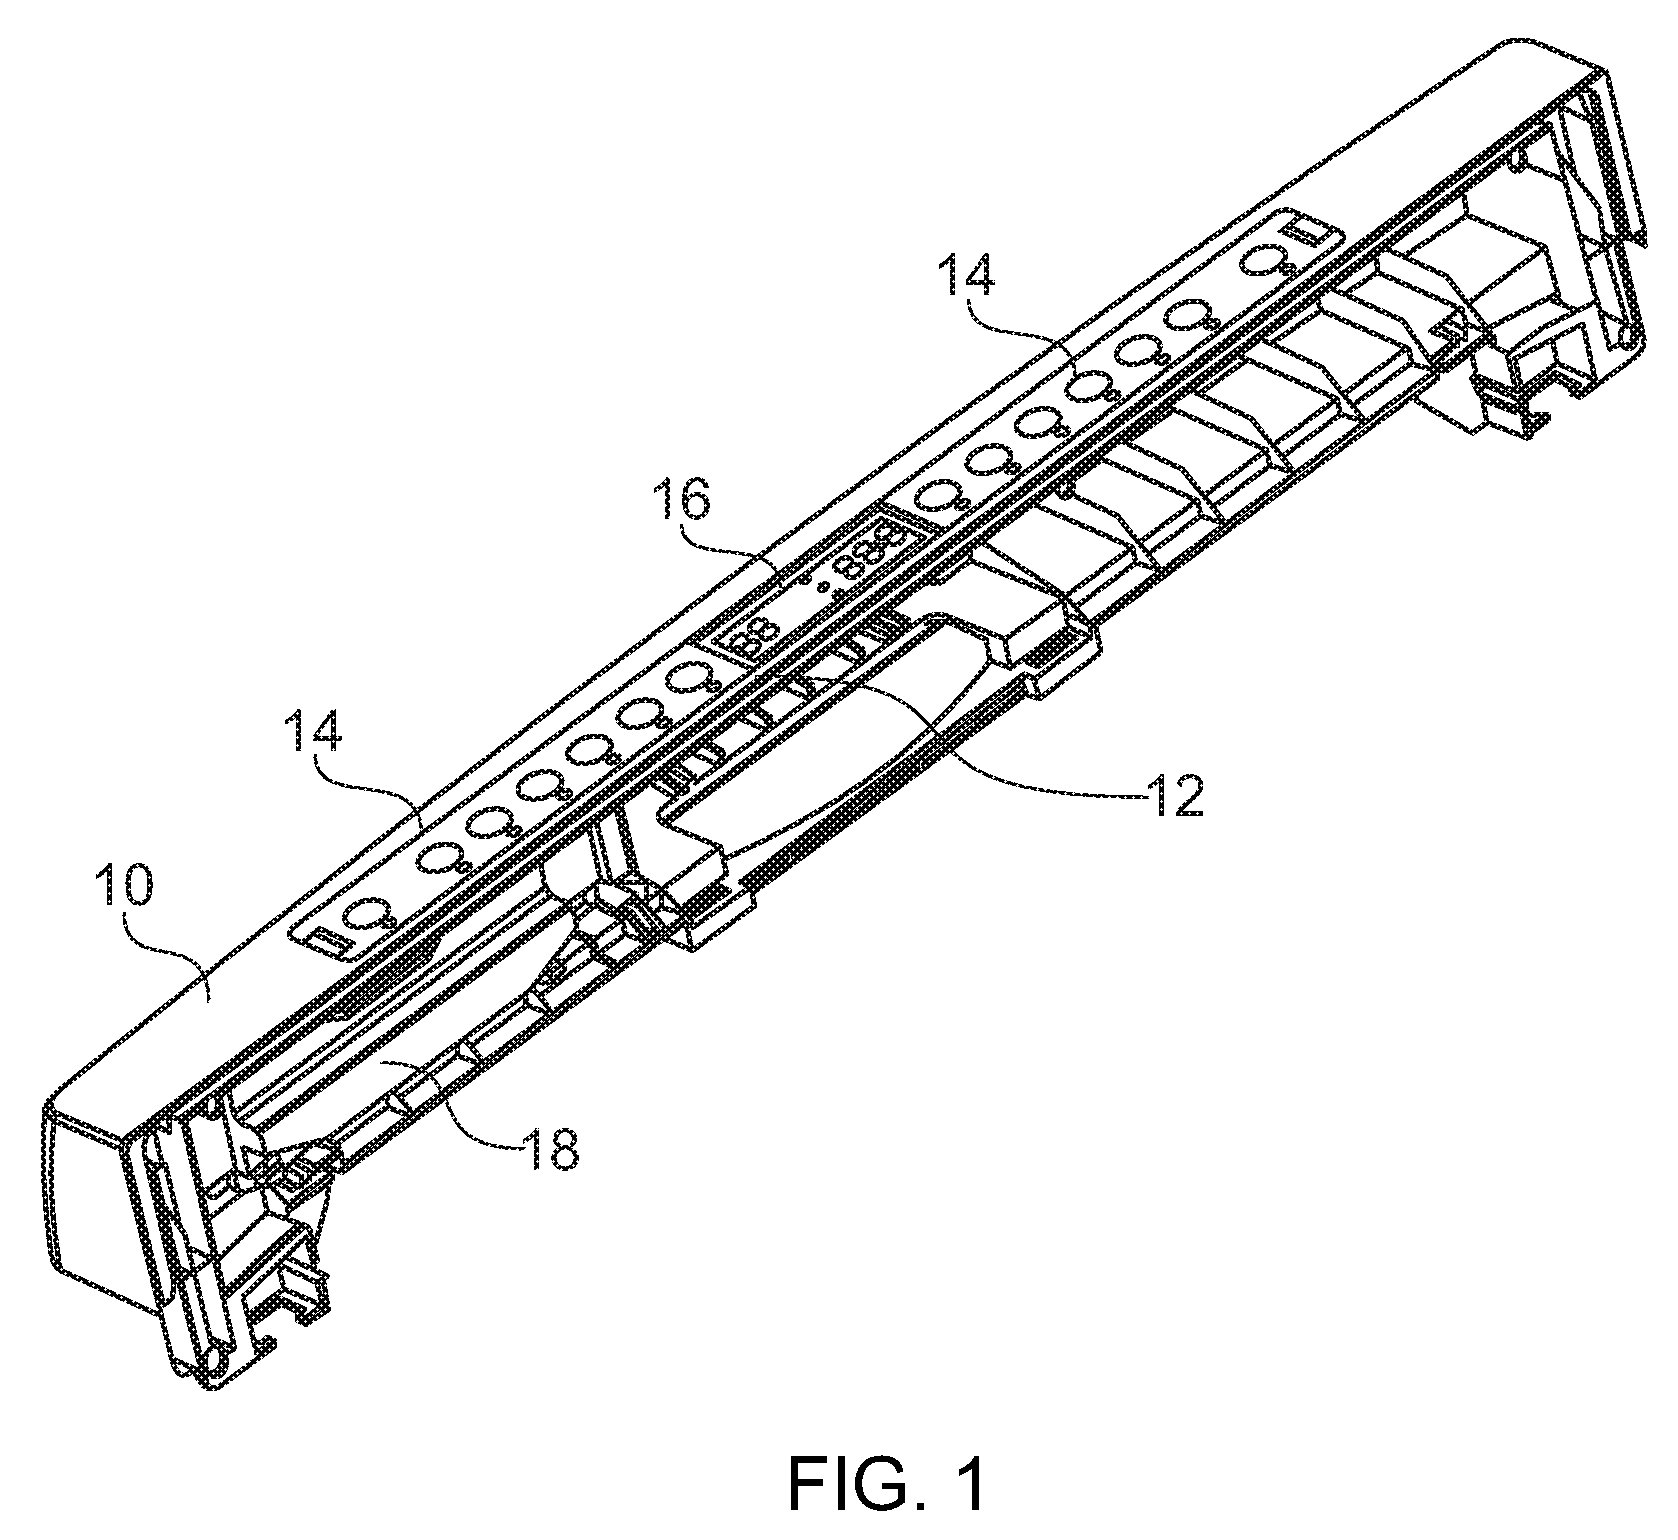 Operator control apparatus having at least one pressure-operated switch